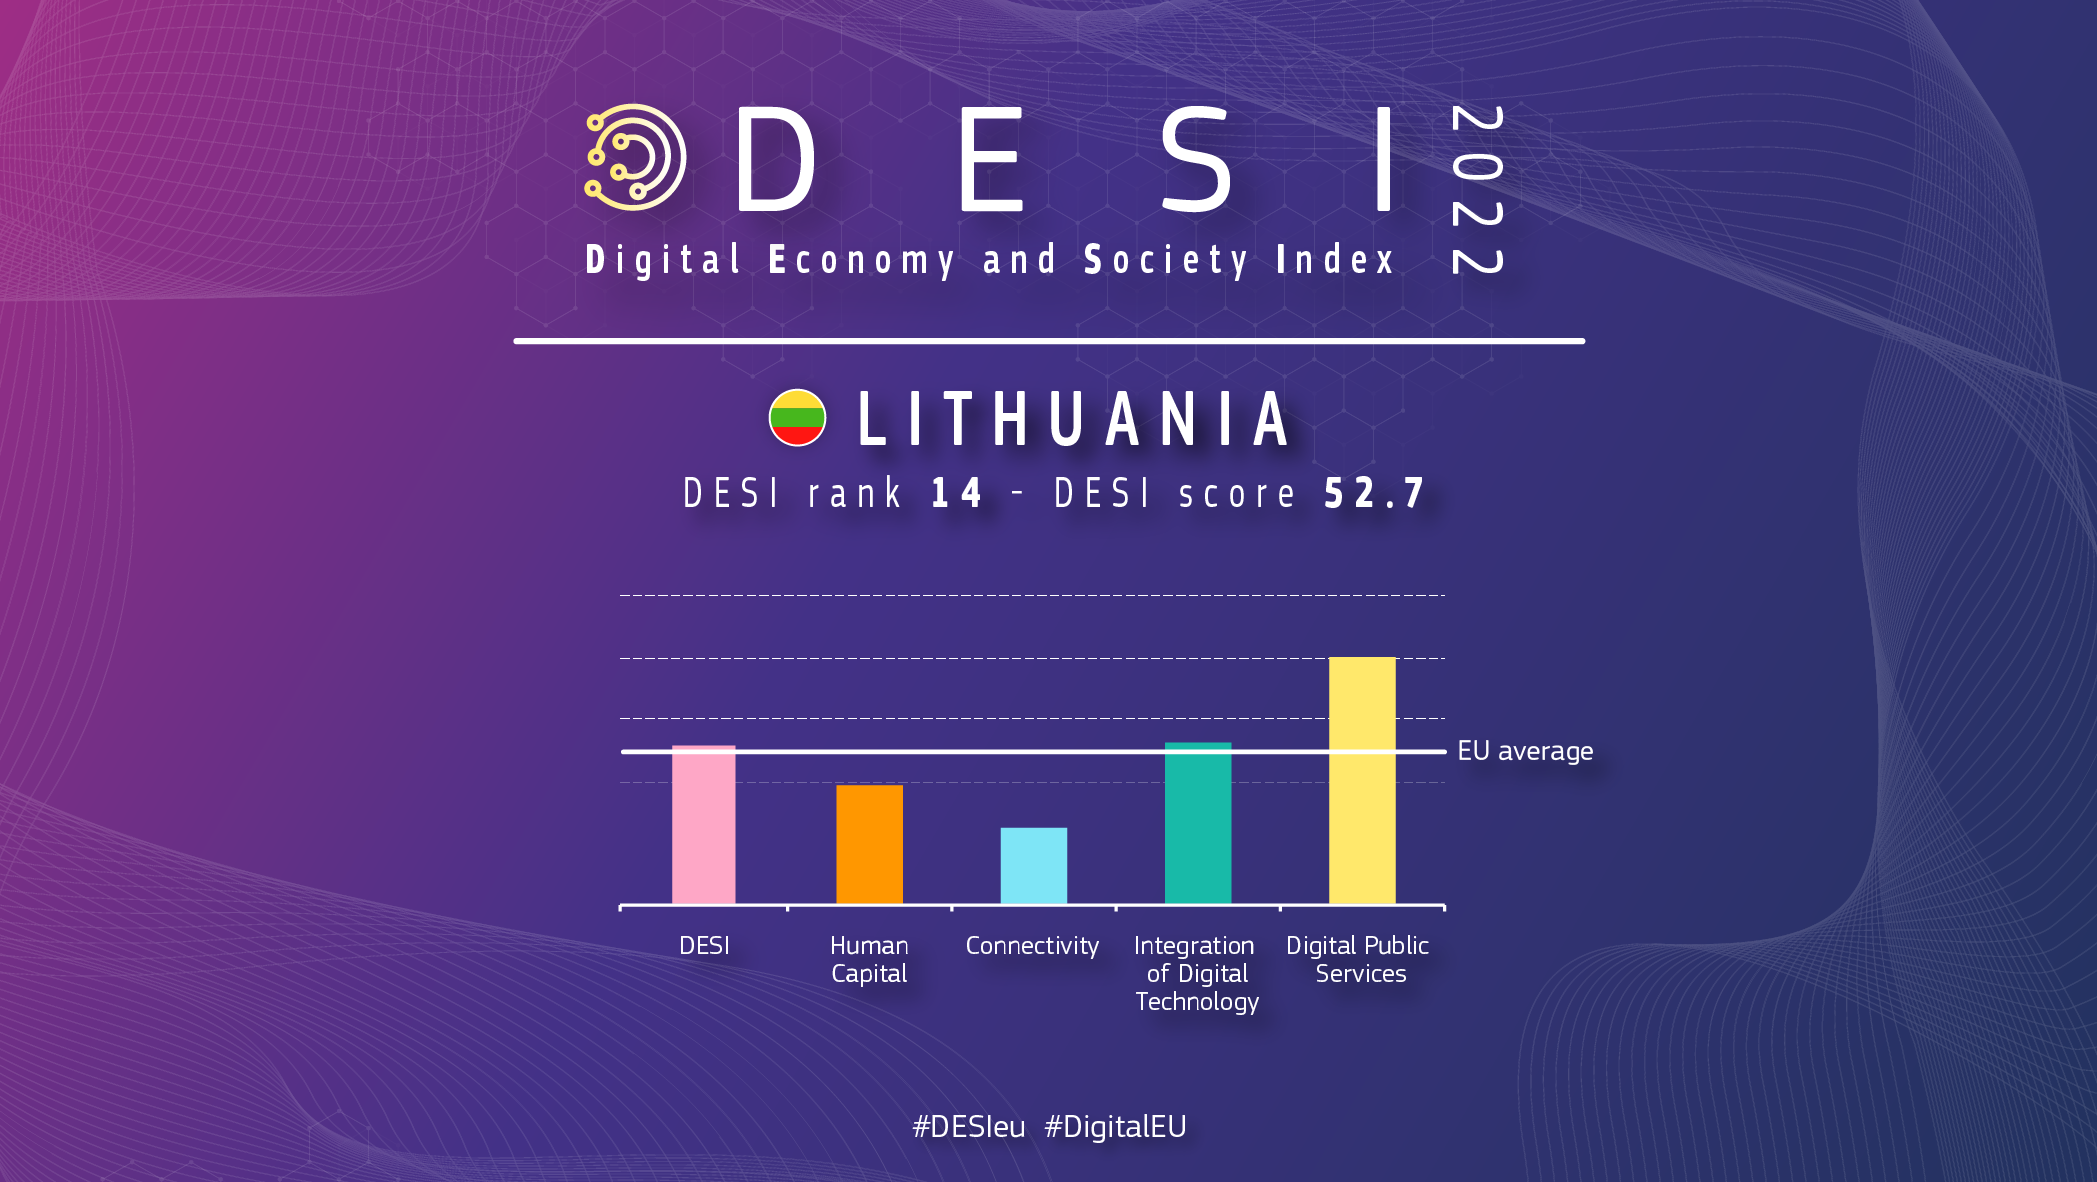 Graphic overview of Lithuania in DESI showing a ranking of 14 with a score of 52.7